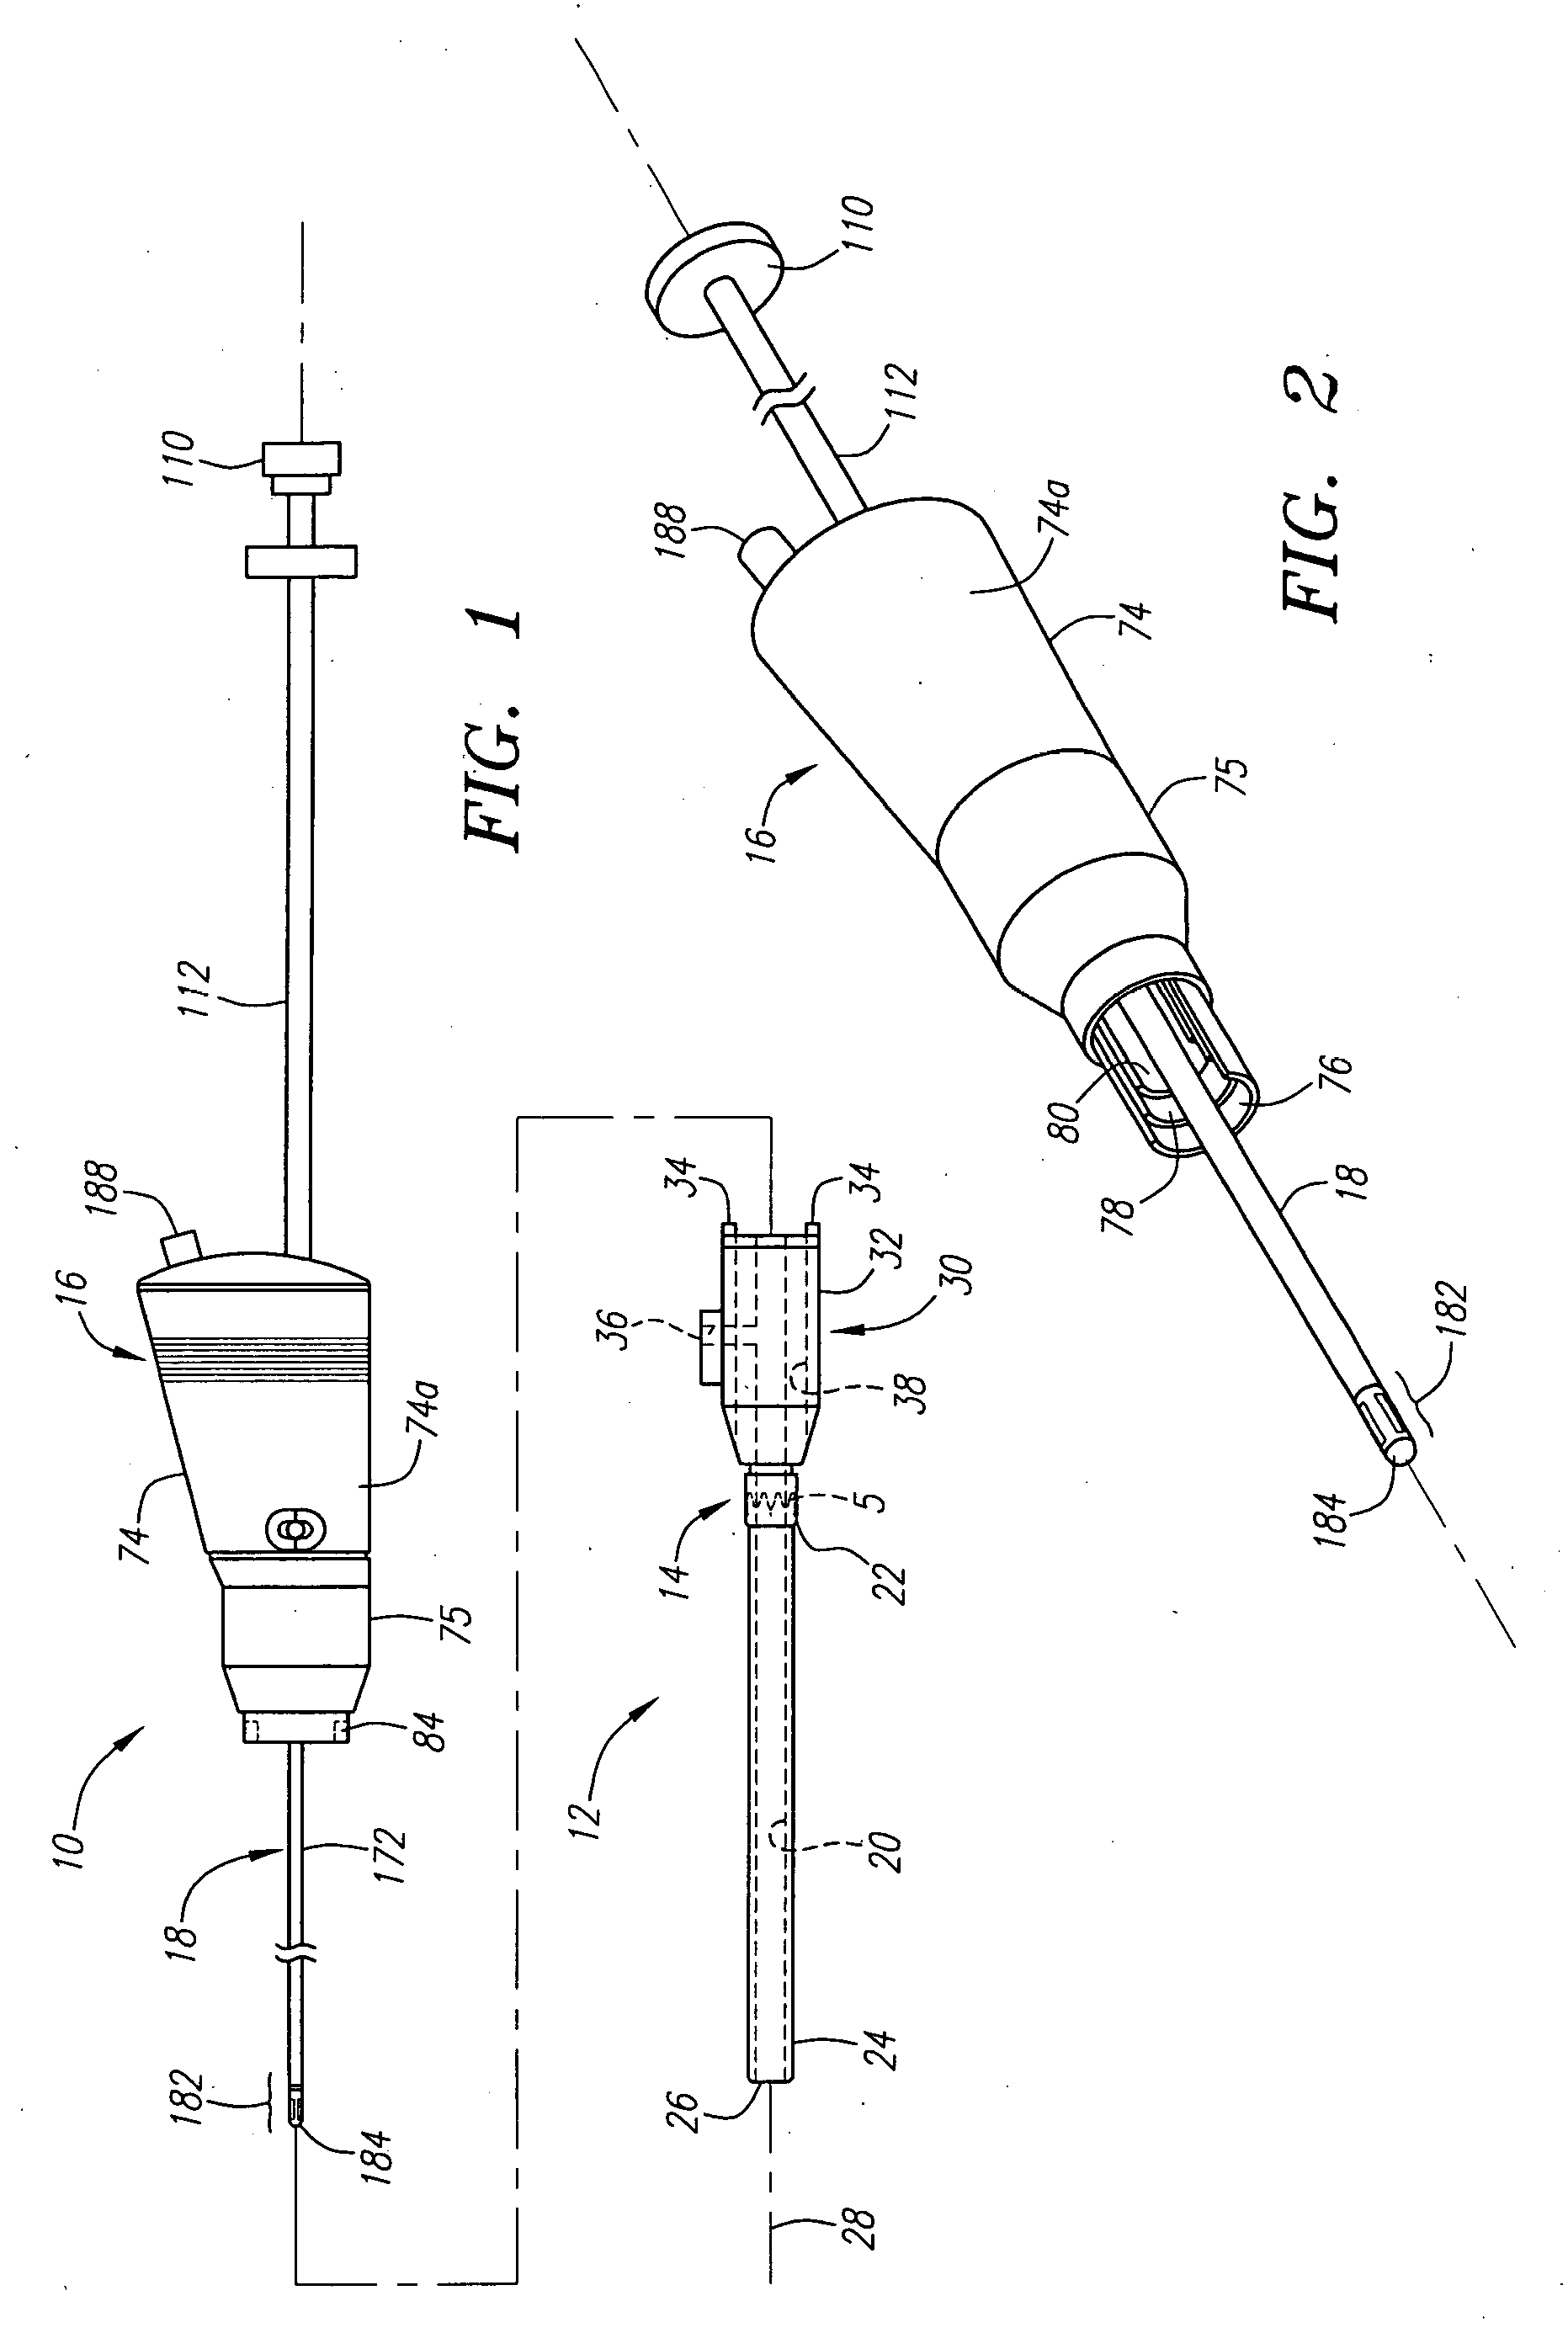 Apparatus and methods for delivering a closure device